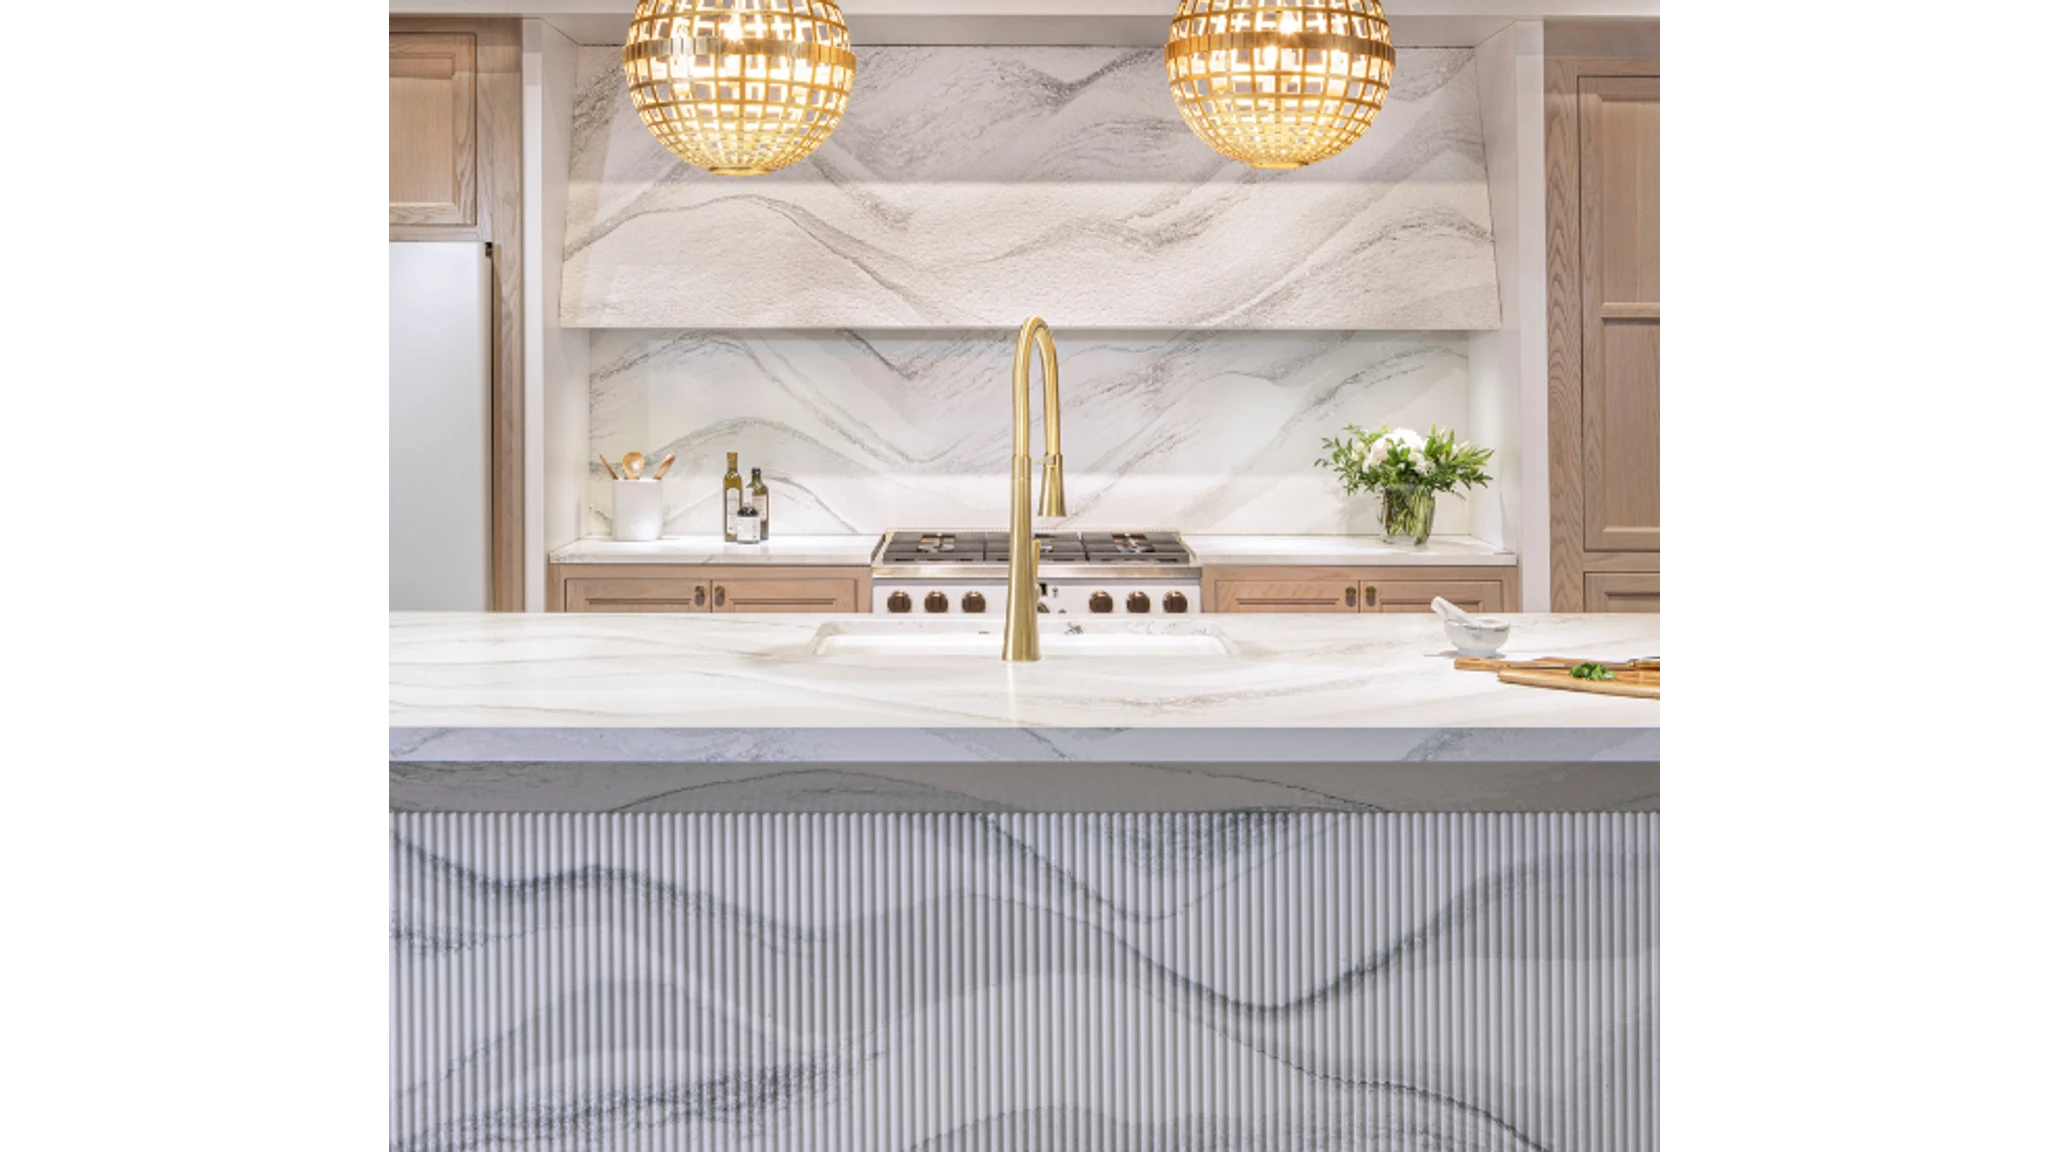 Introducing Harlow and Hailey | Cambria® Quartz Surfaces - Cambria ...